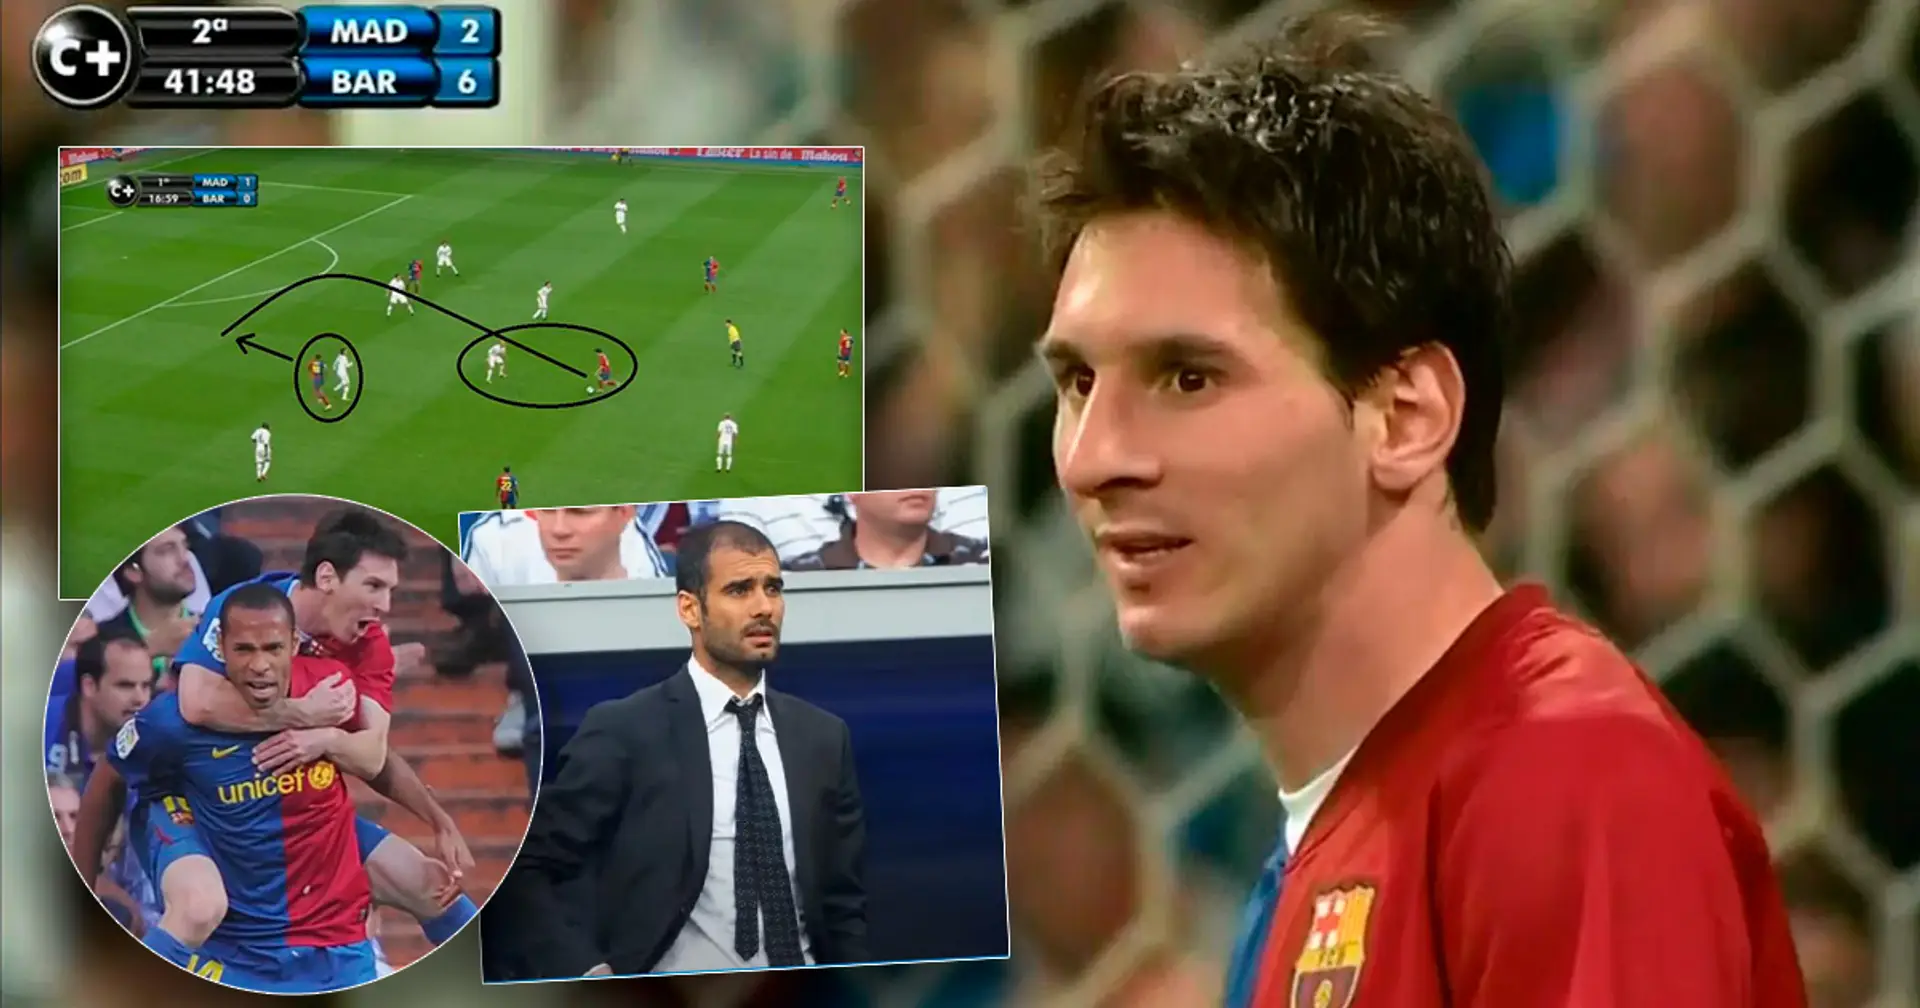 Revealed: What Guardiola told Messi before Barcelona's historic 6-2 win over Real Madrid